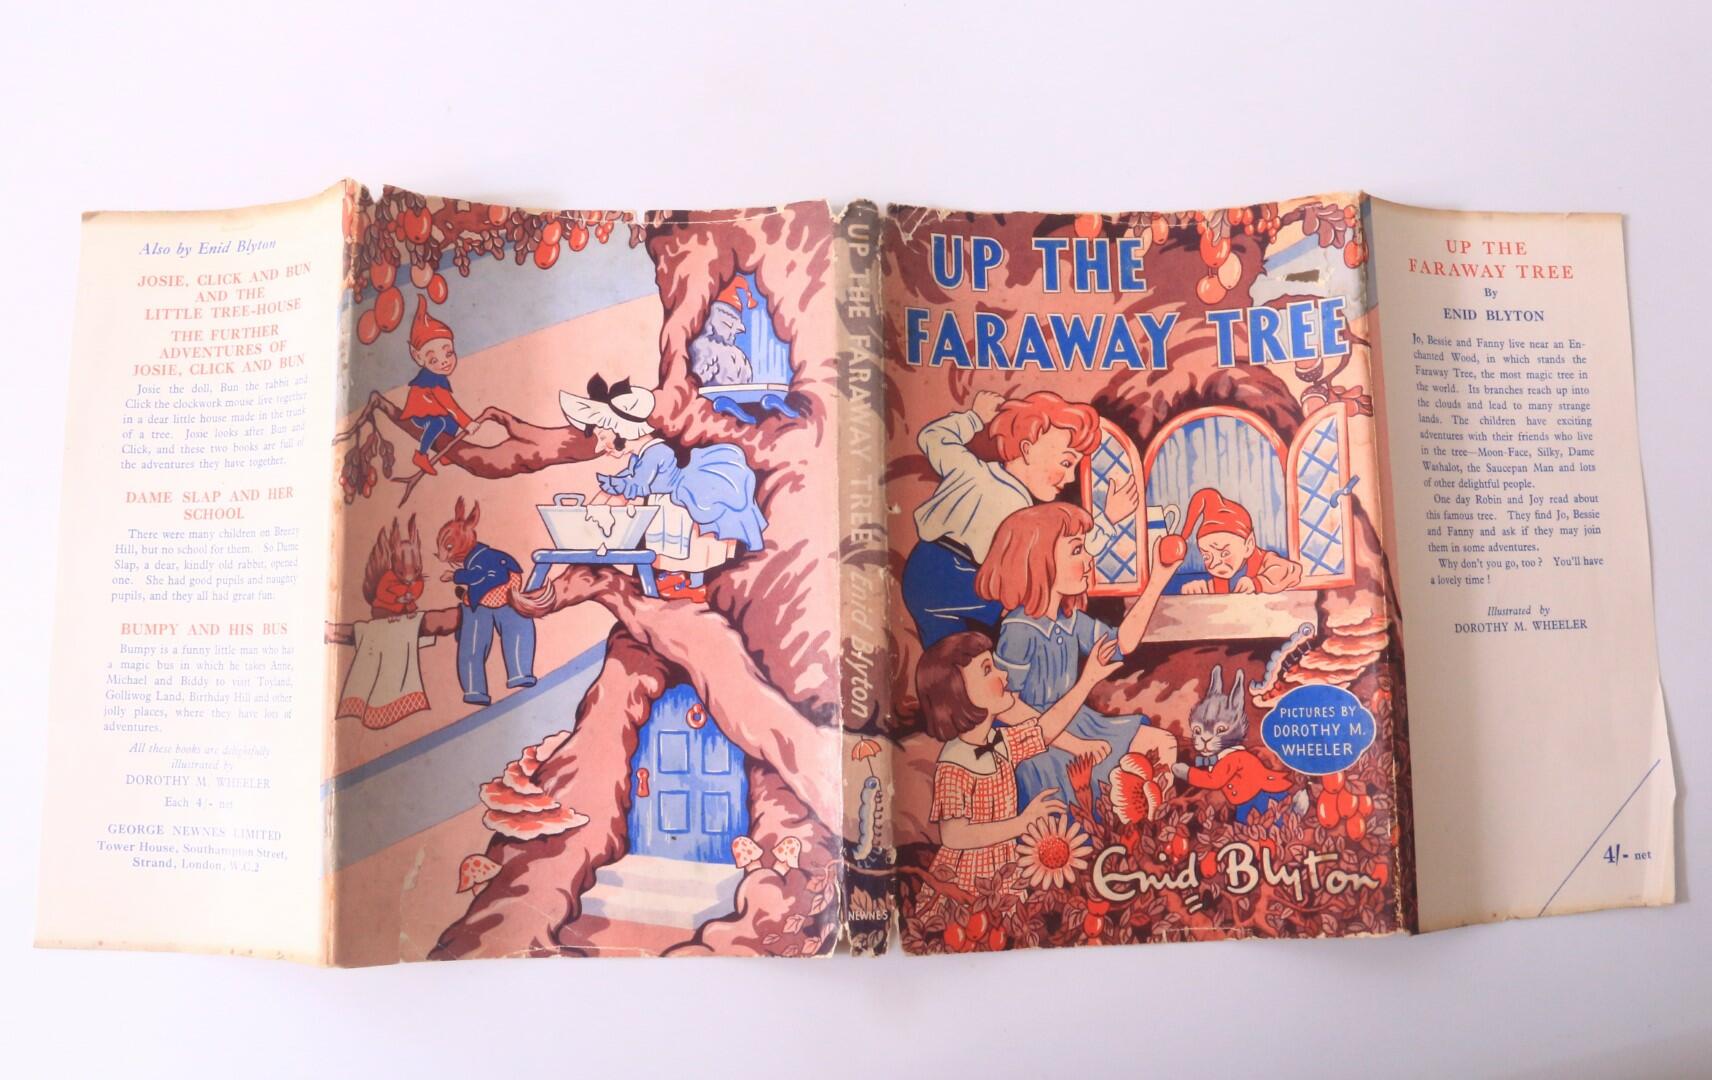 Enid Blyton - Up The Faraway Tree - Newnes, 1951, First Edition.